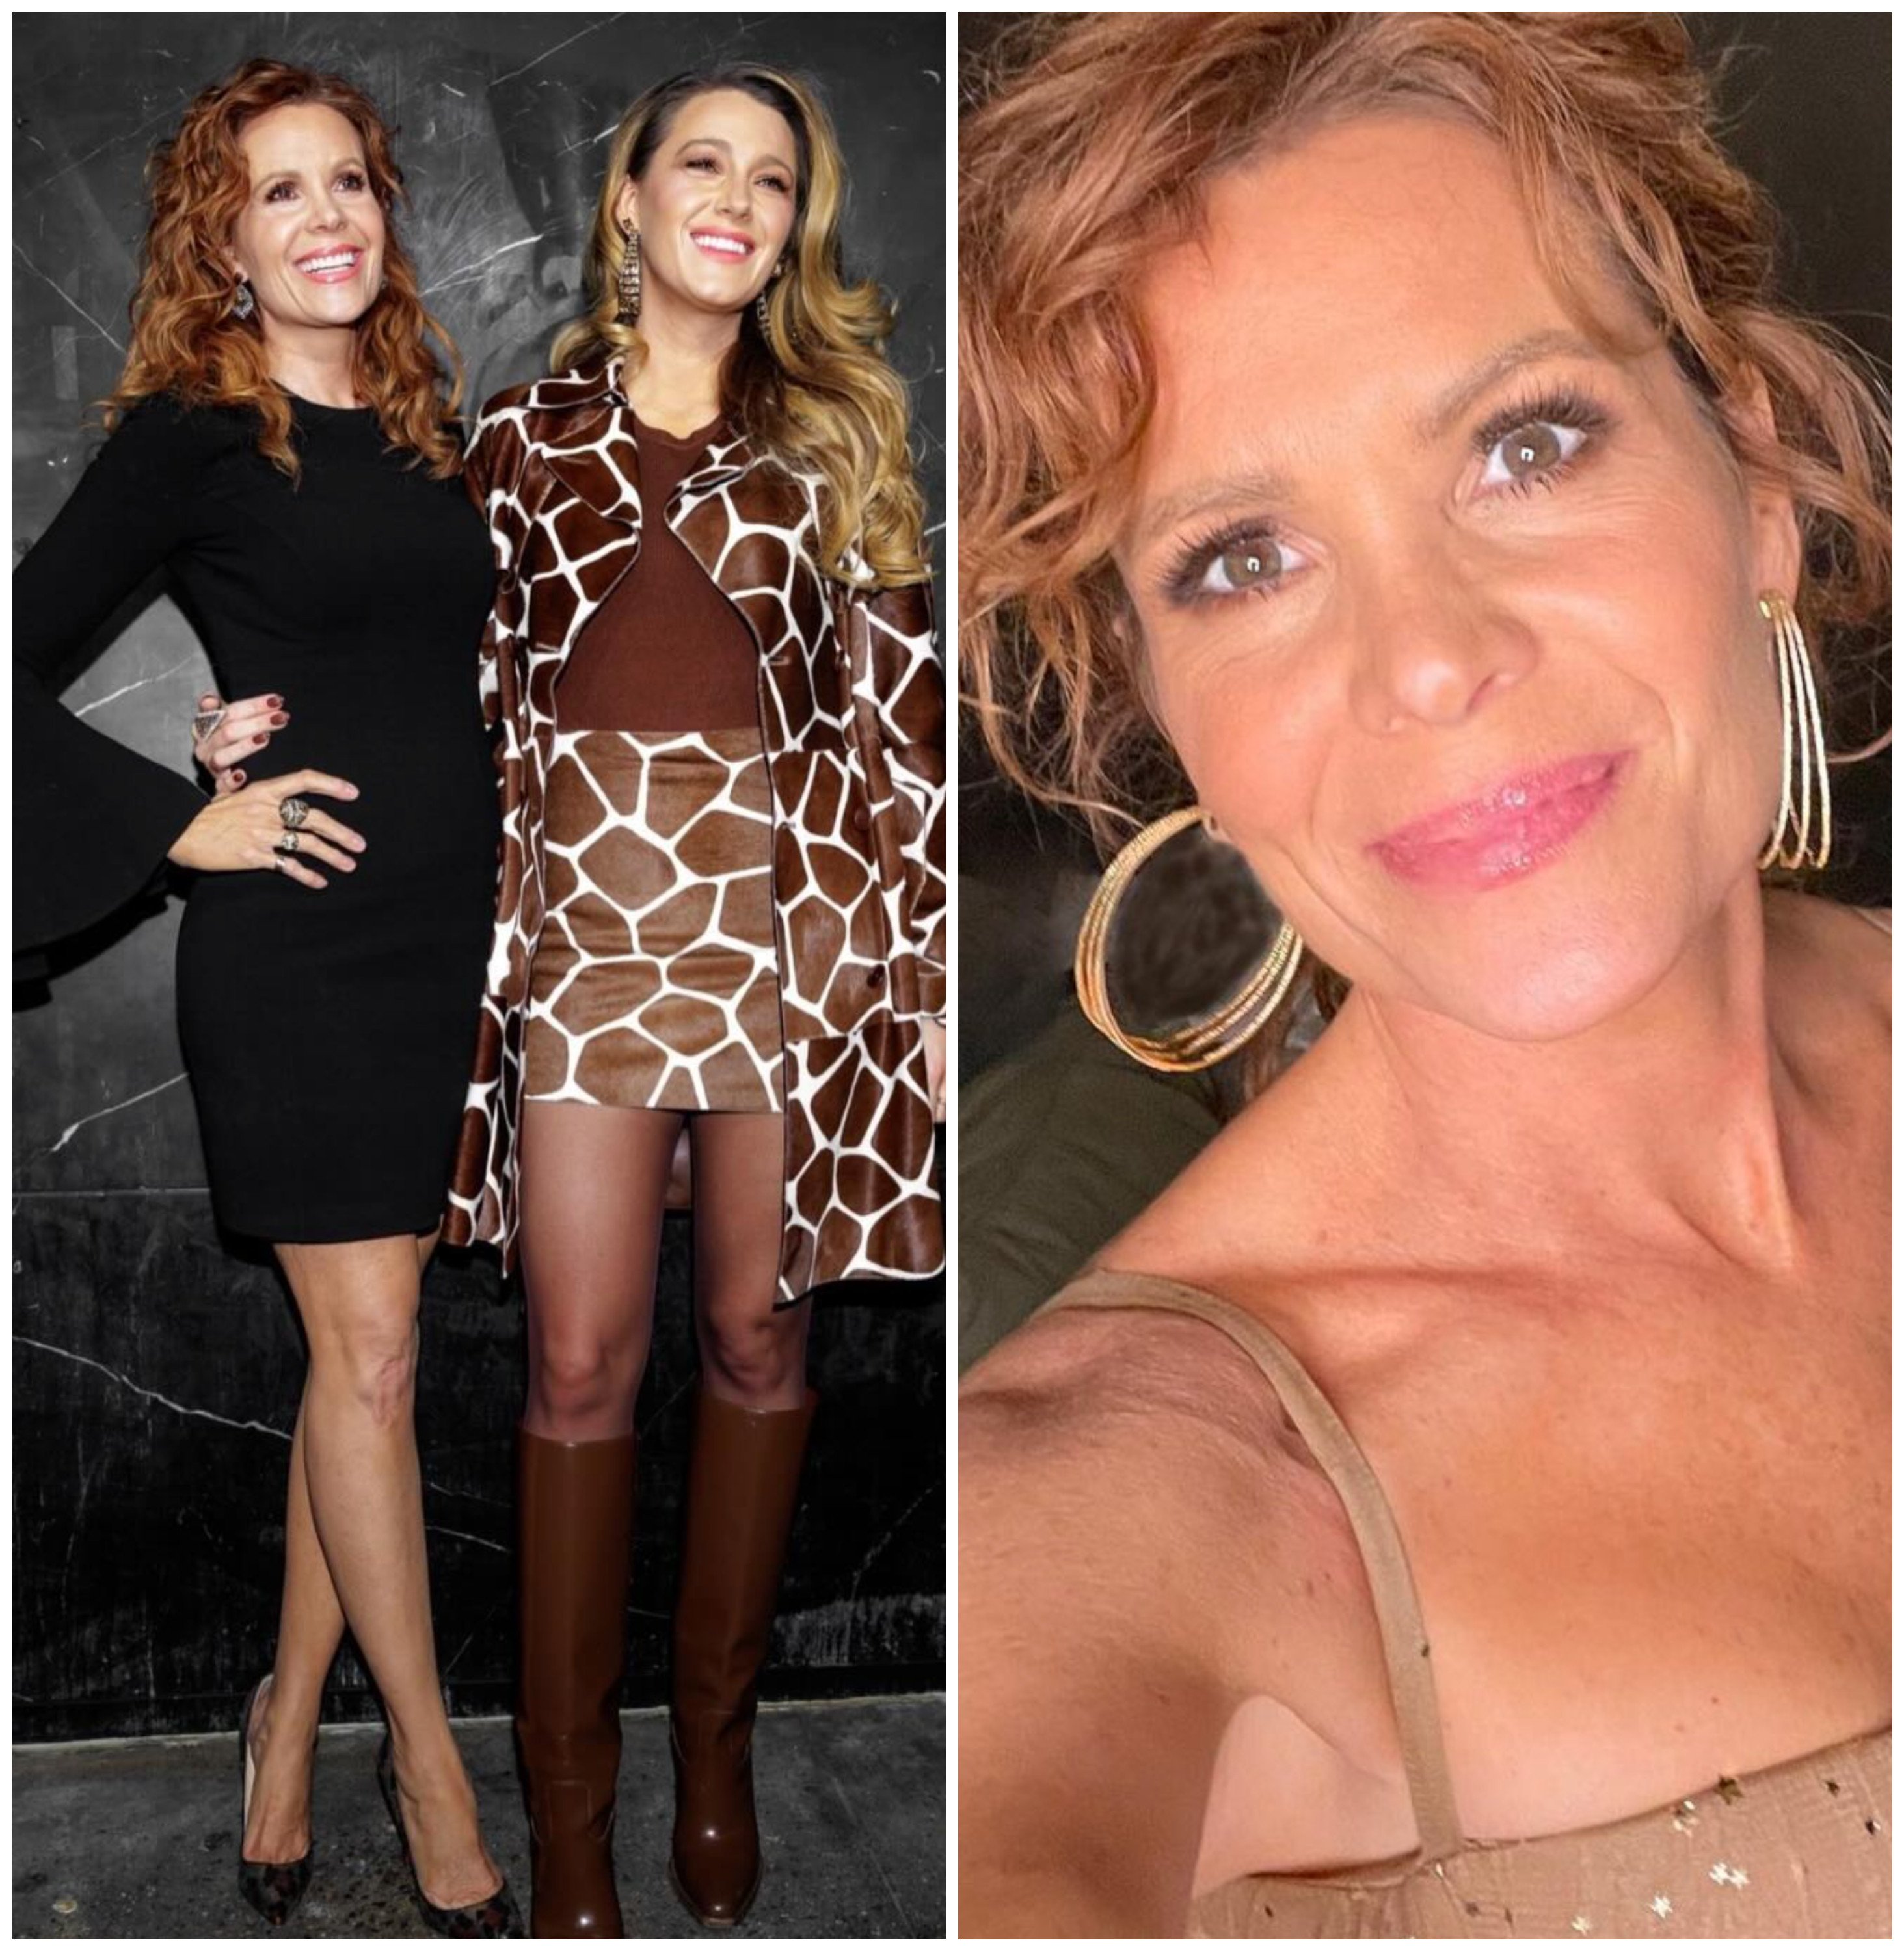 Blake Lively's Sister Robyn Lively Was an '80's Child Star